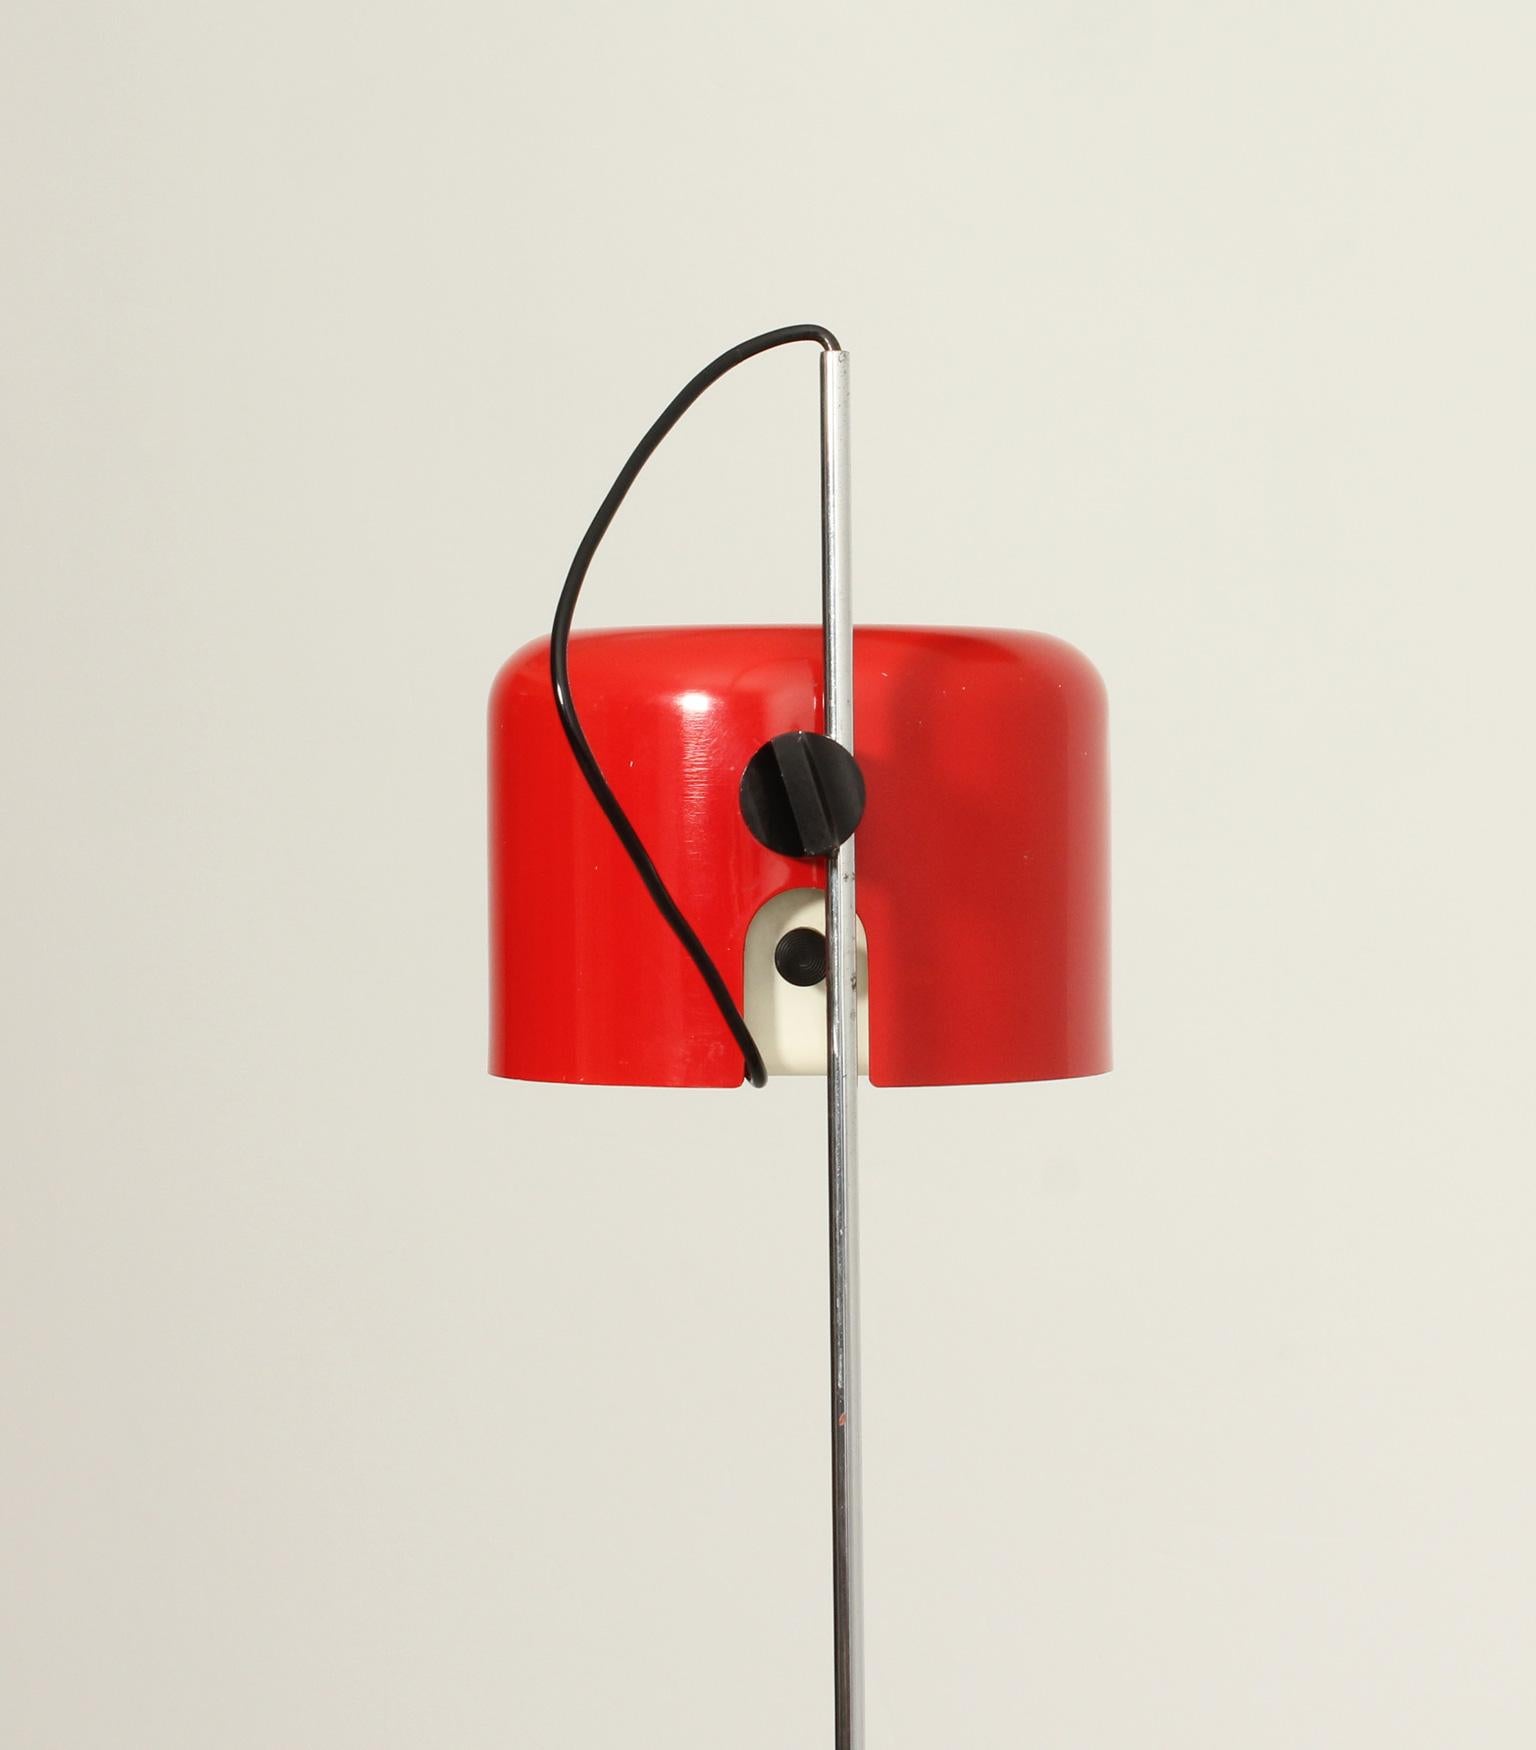 Mid-20th Century Red Coupé Floor Lamp by Joe Colombo for Oluce